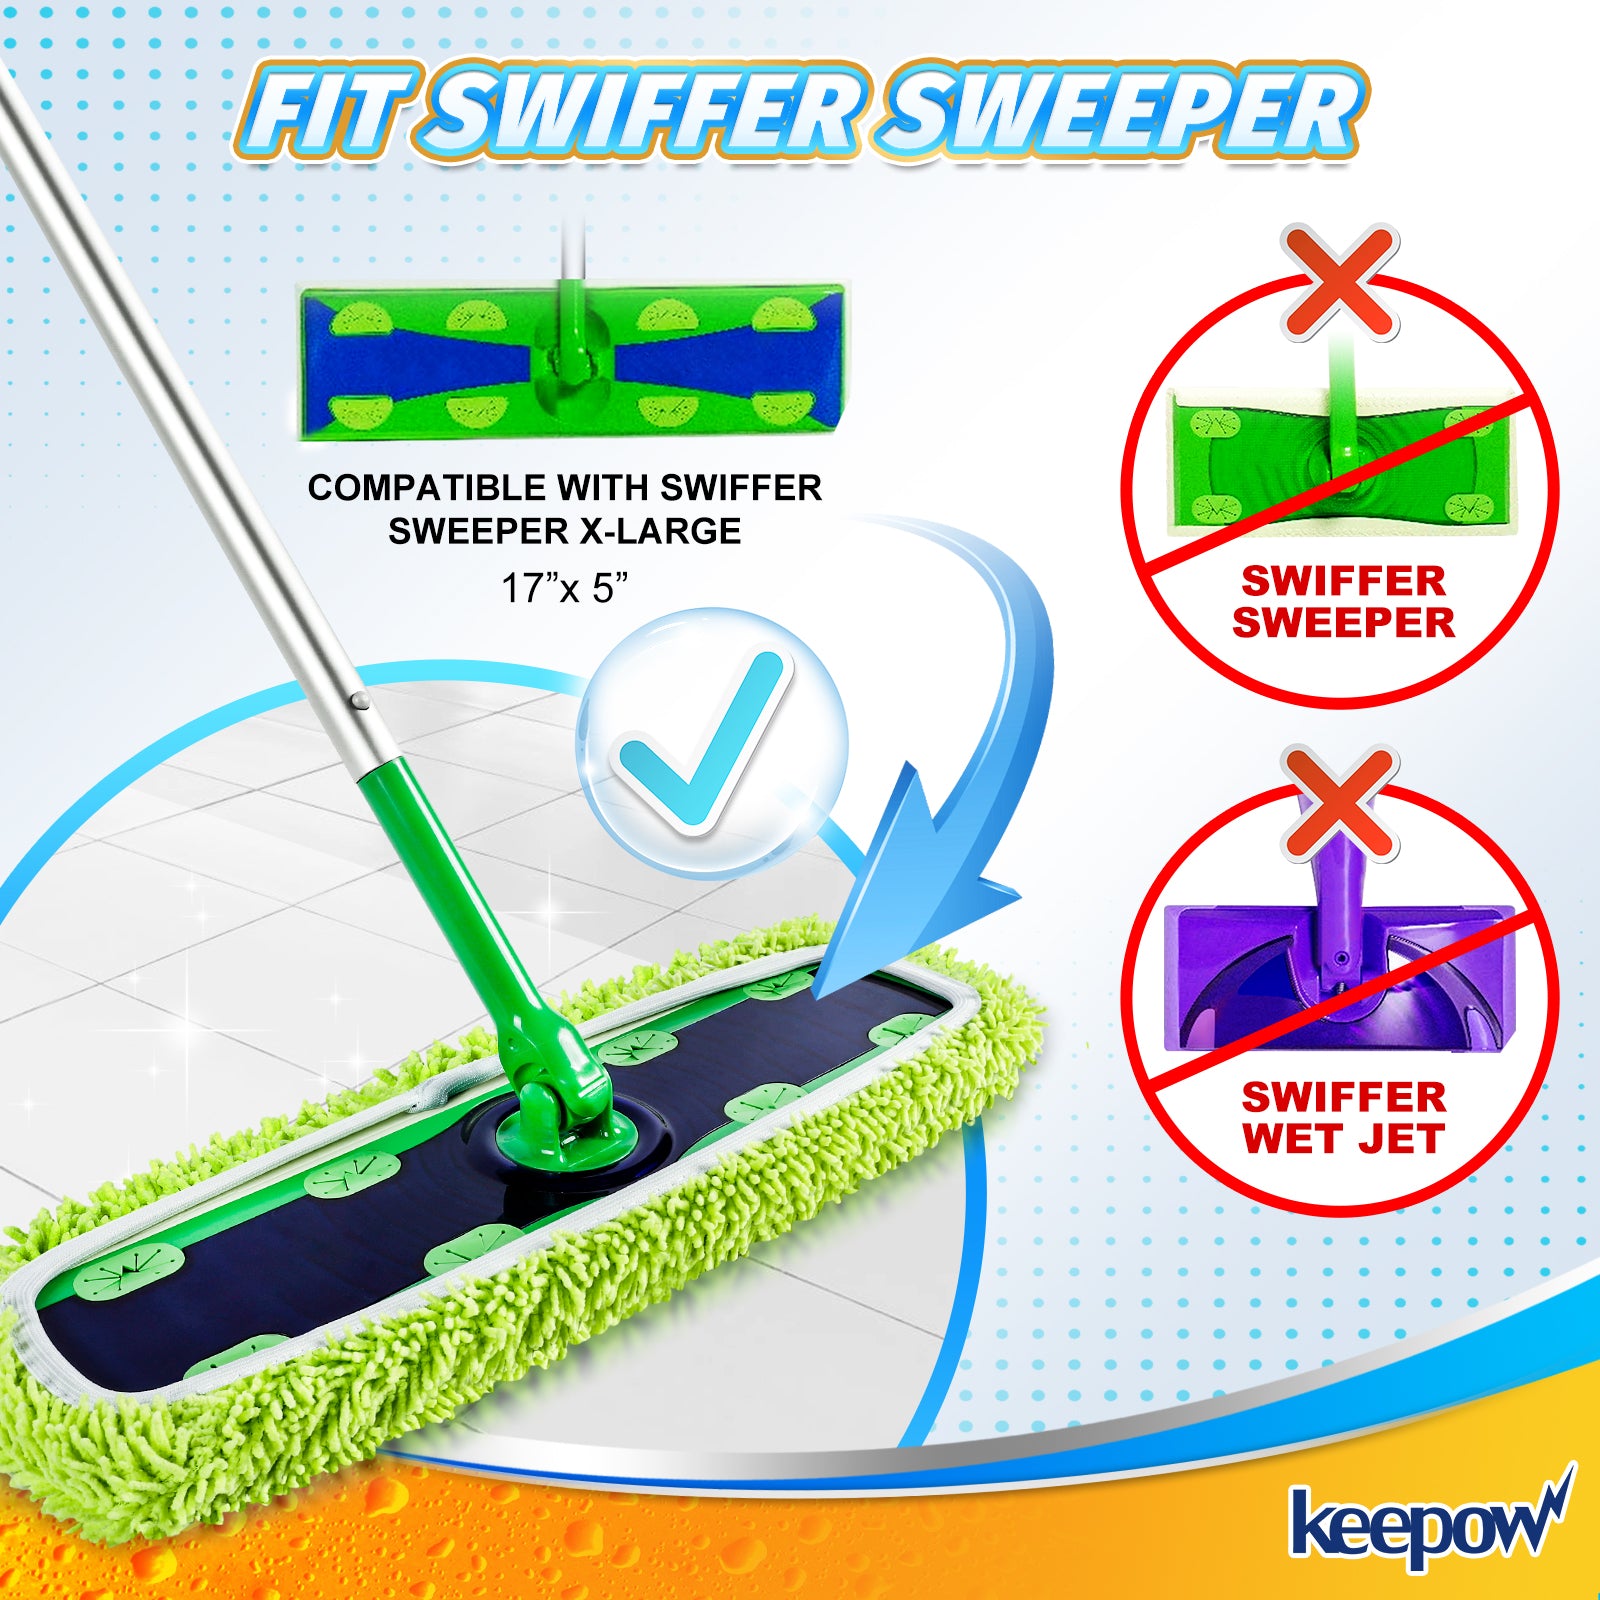 KEEPOW Reusable XL Mop Pads Compatible for Swiffer XL Sweeper, X-Large Dry Sweeping Cloths, Wet Mopping Cloths, Washable Microfiber XL Wet Pads Refills for Surface/Hardwood Floor Cleaning, 4 Pack